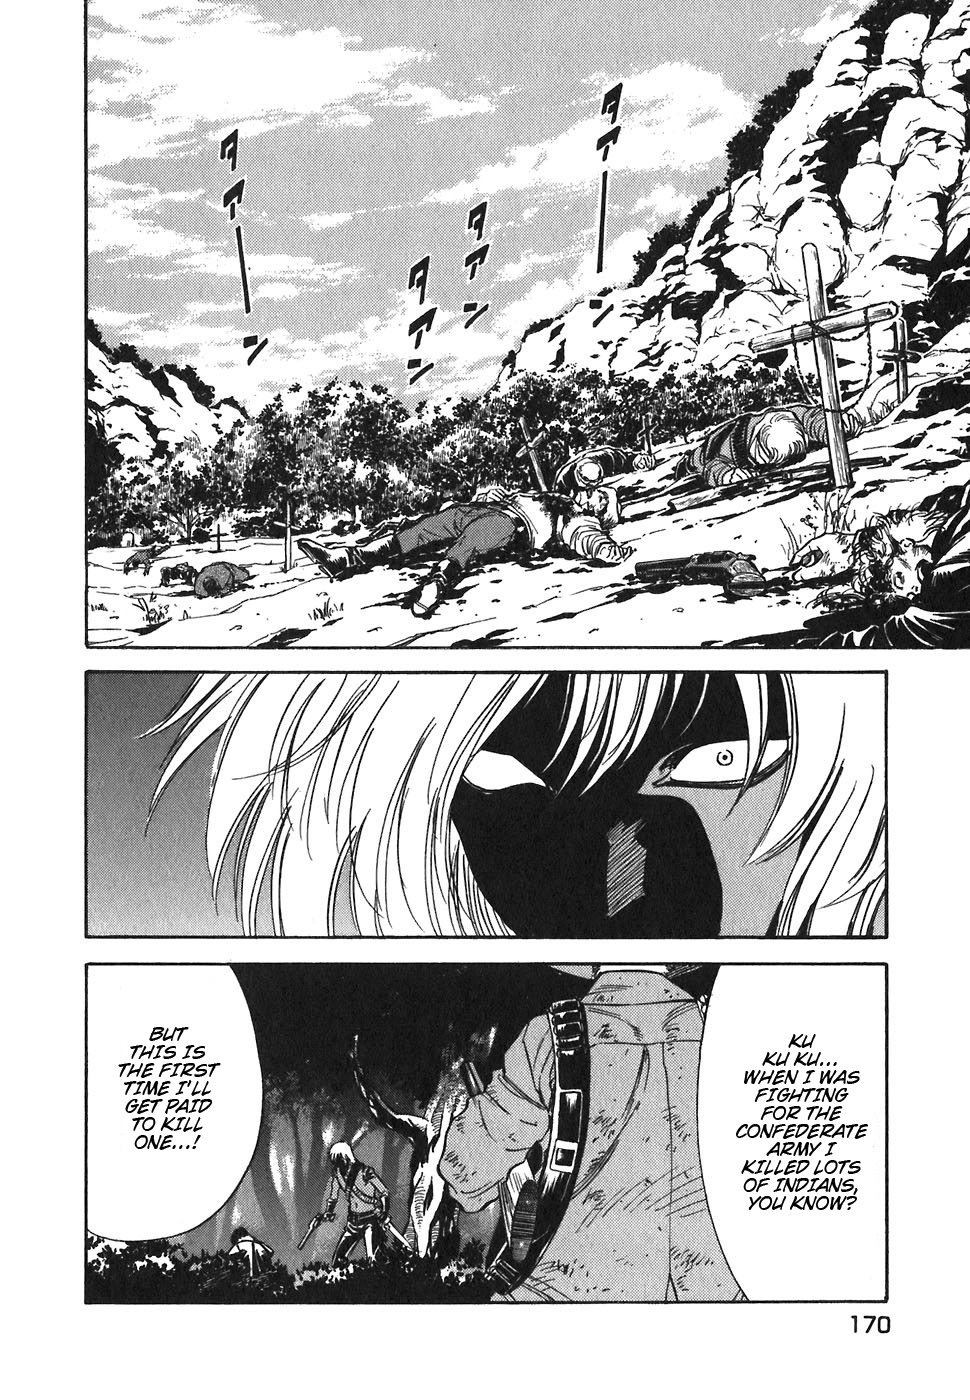 RED: Living on the Edge Vol. 10 Ch. 79 Death Wish 8